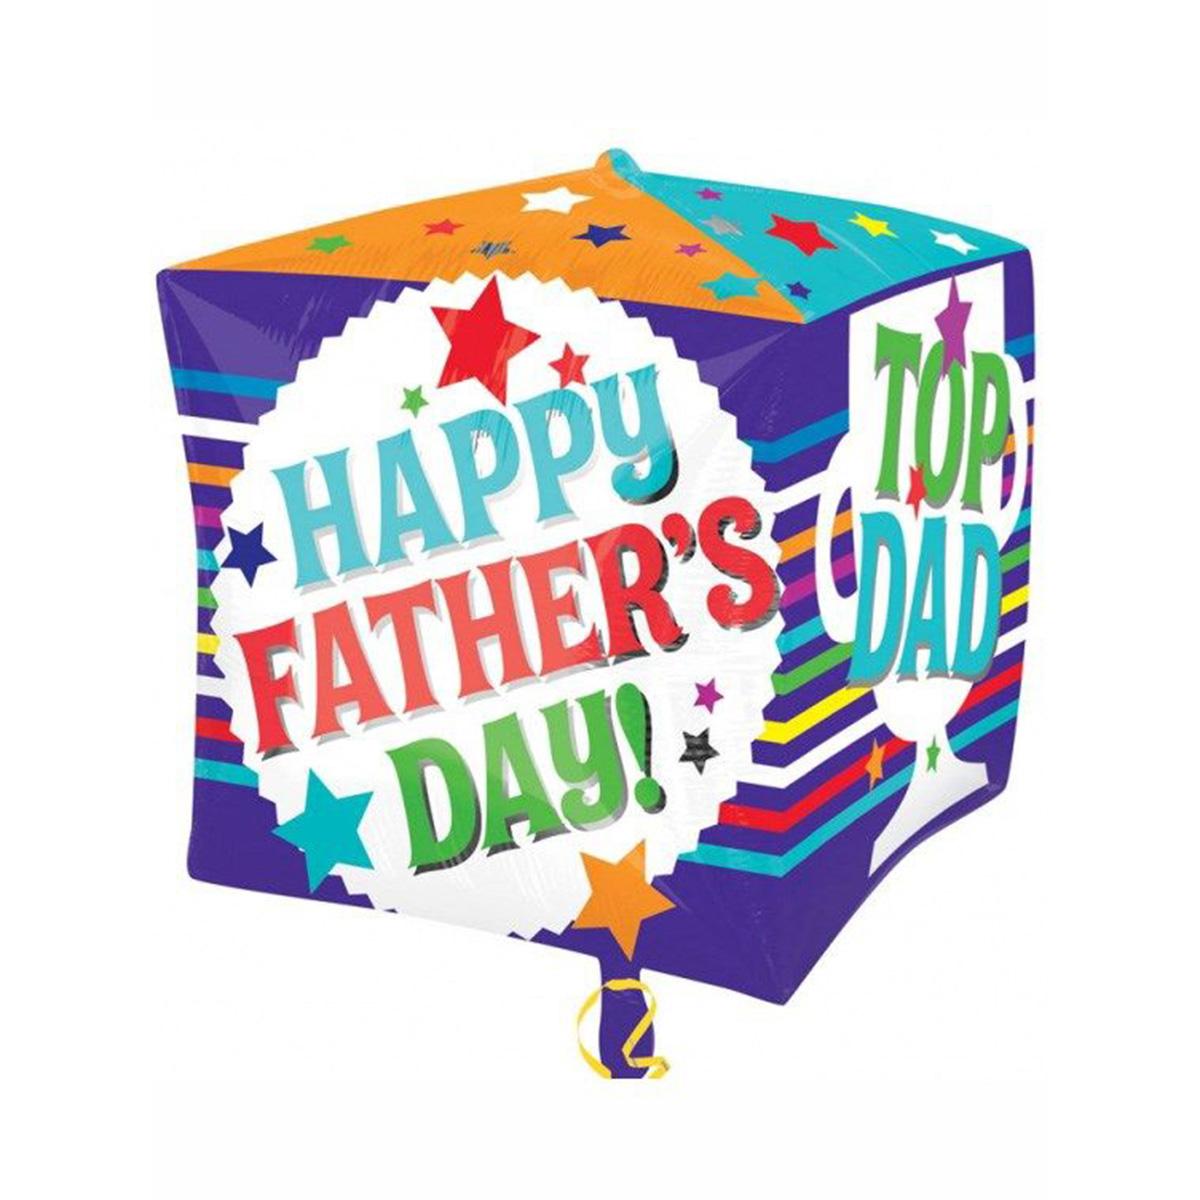 Father's Day Messages UltraShape Cubez Balloon 15in Balloons & Streamers - Party Centre